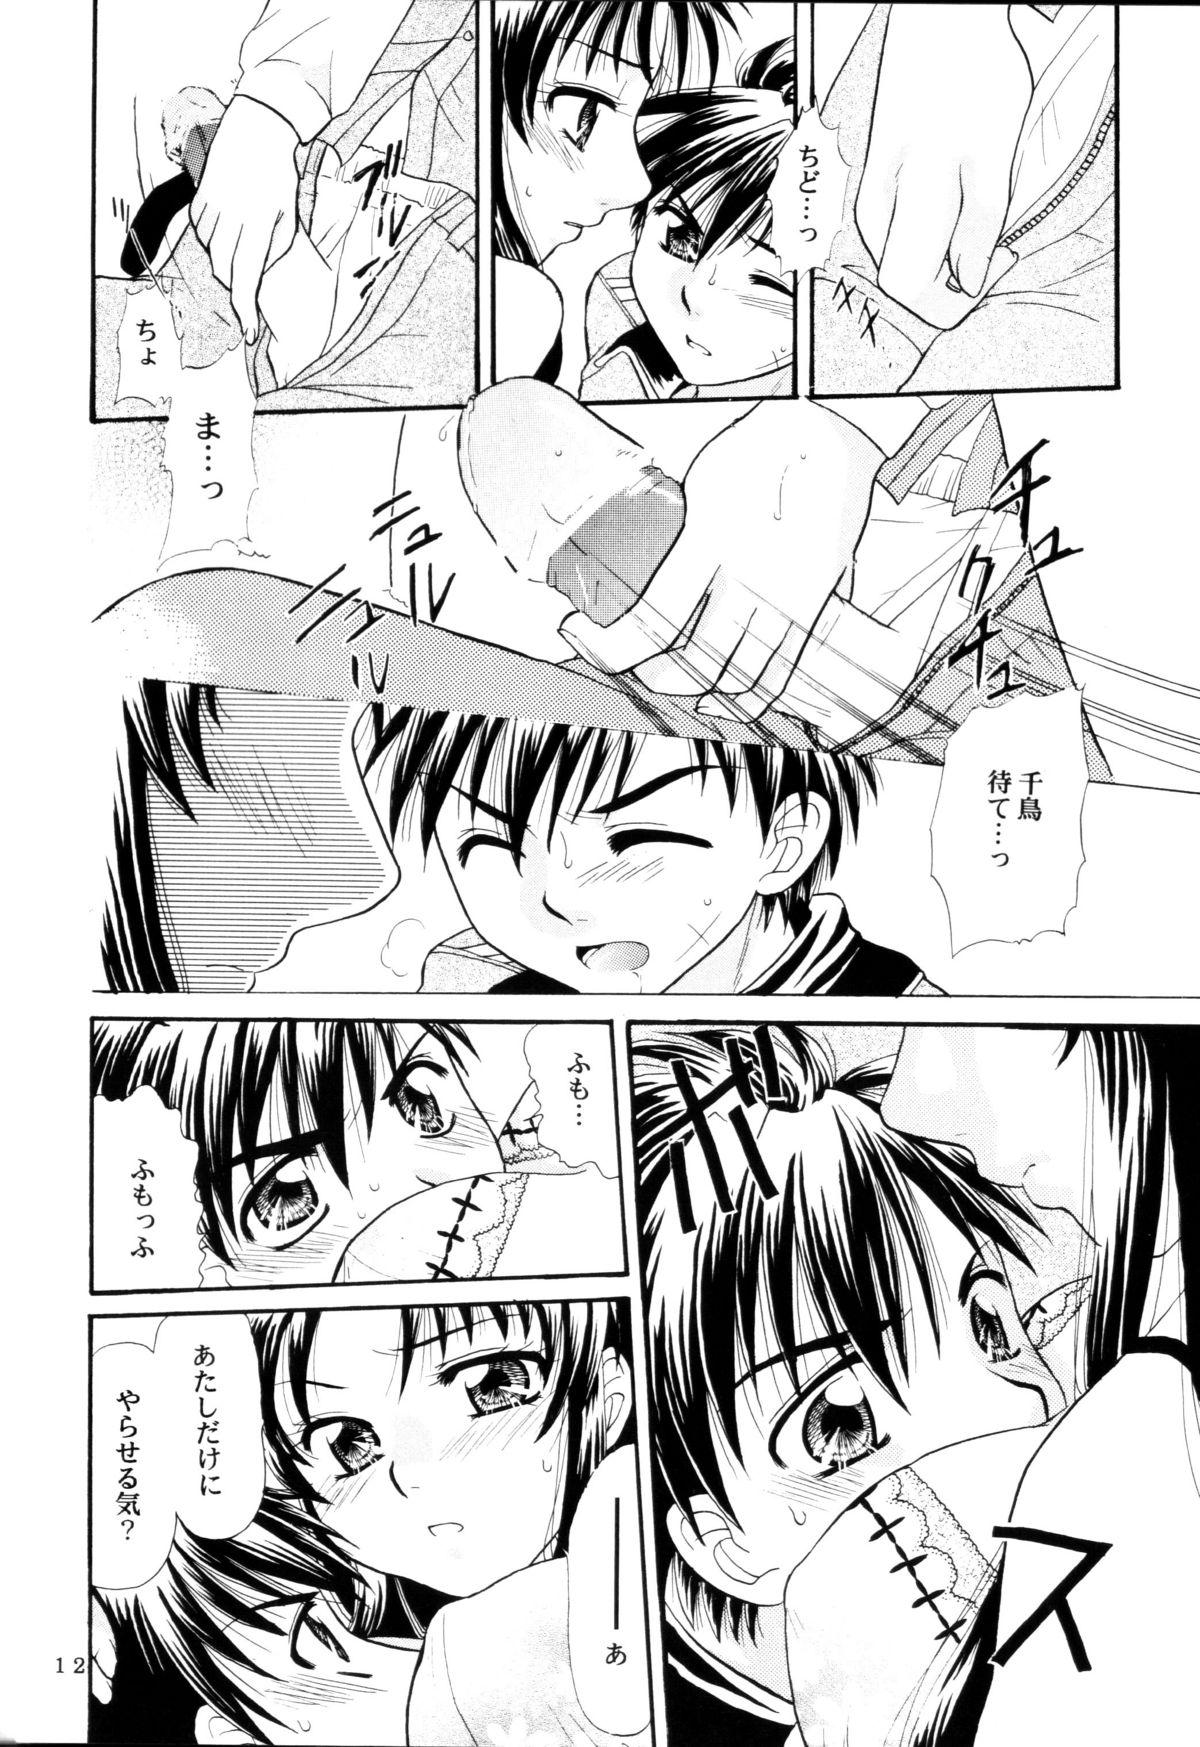 Bisex A.I. - Full metal panic Abuse - Page 11